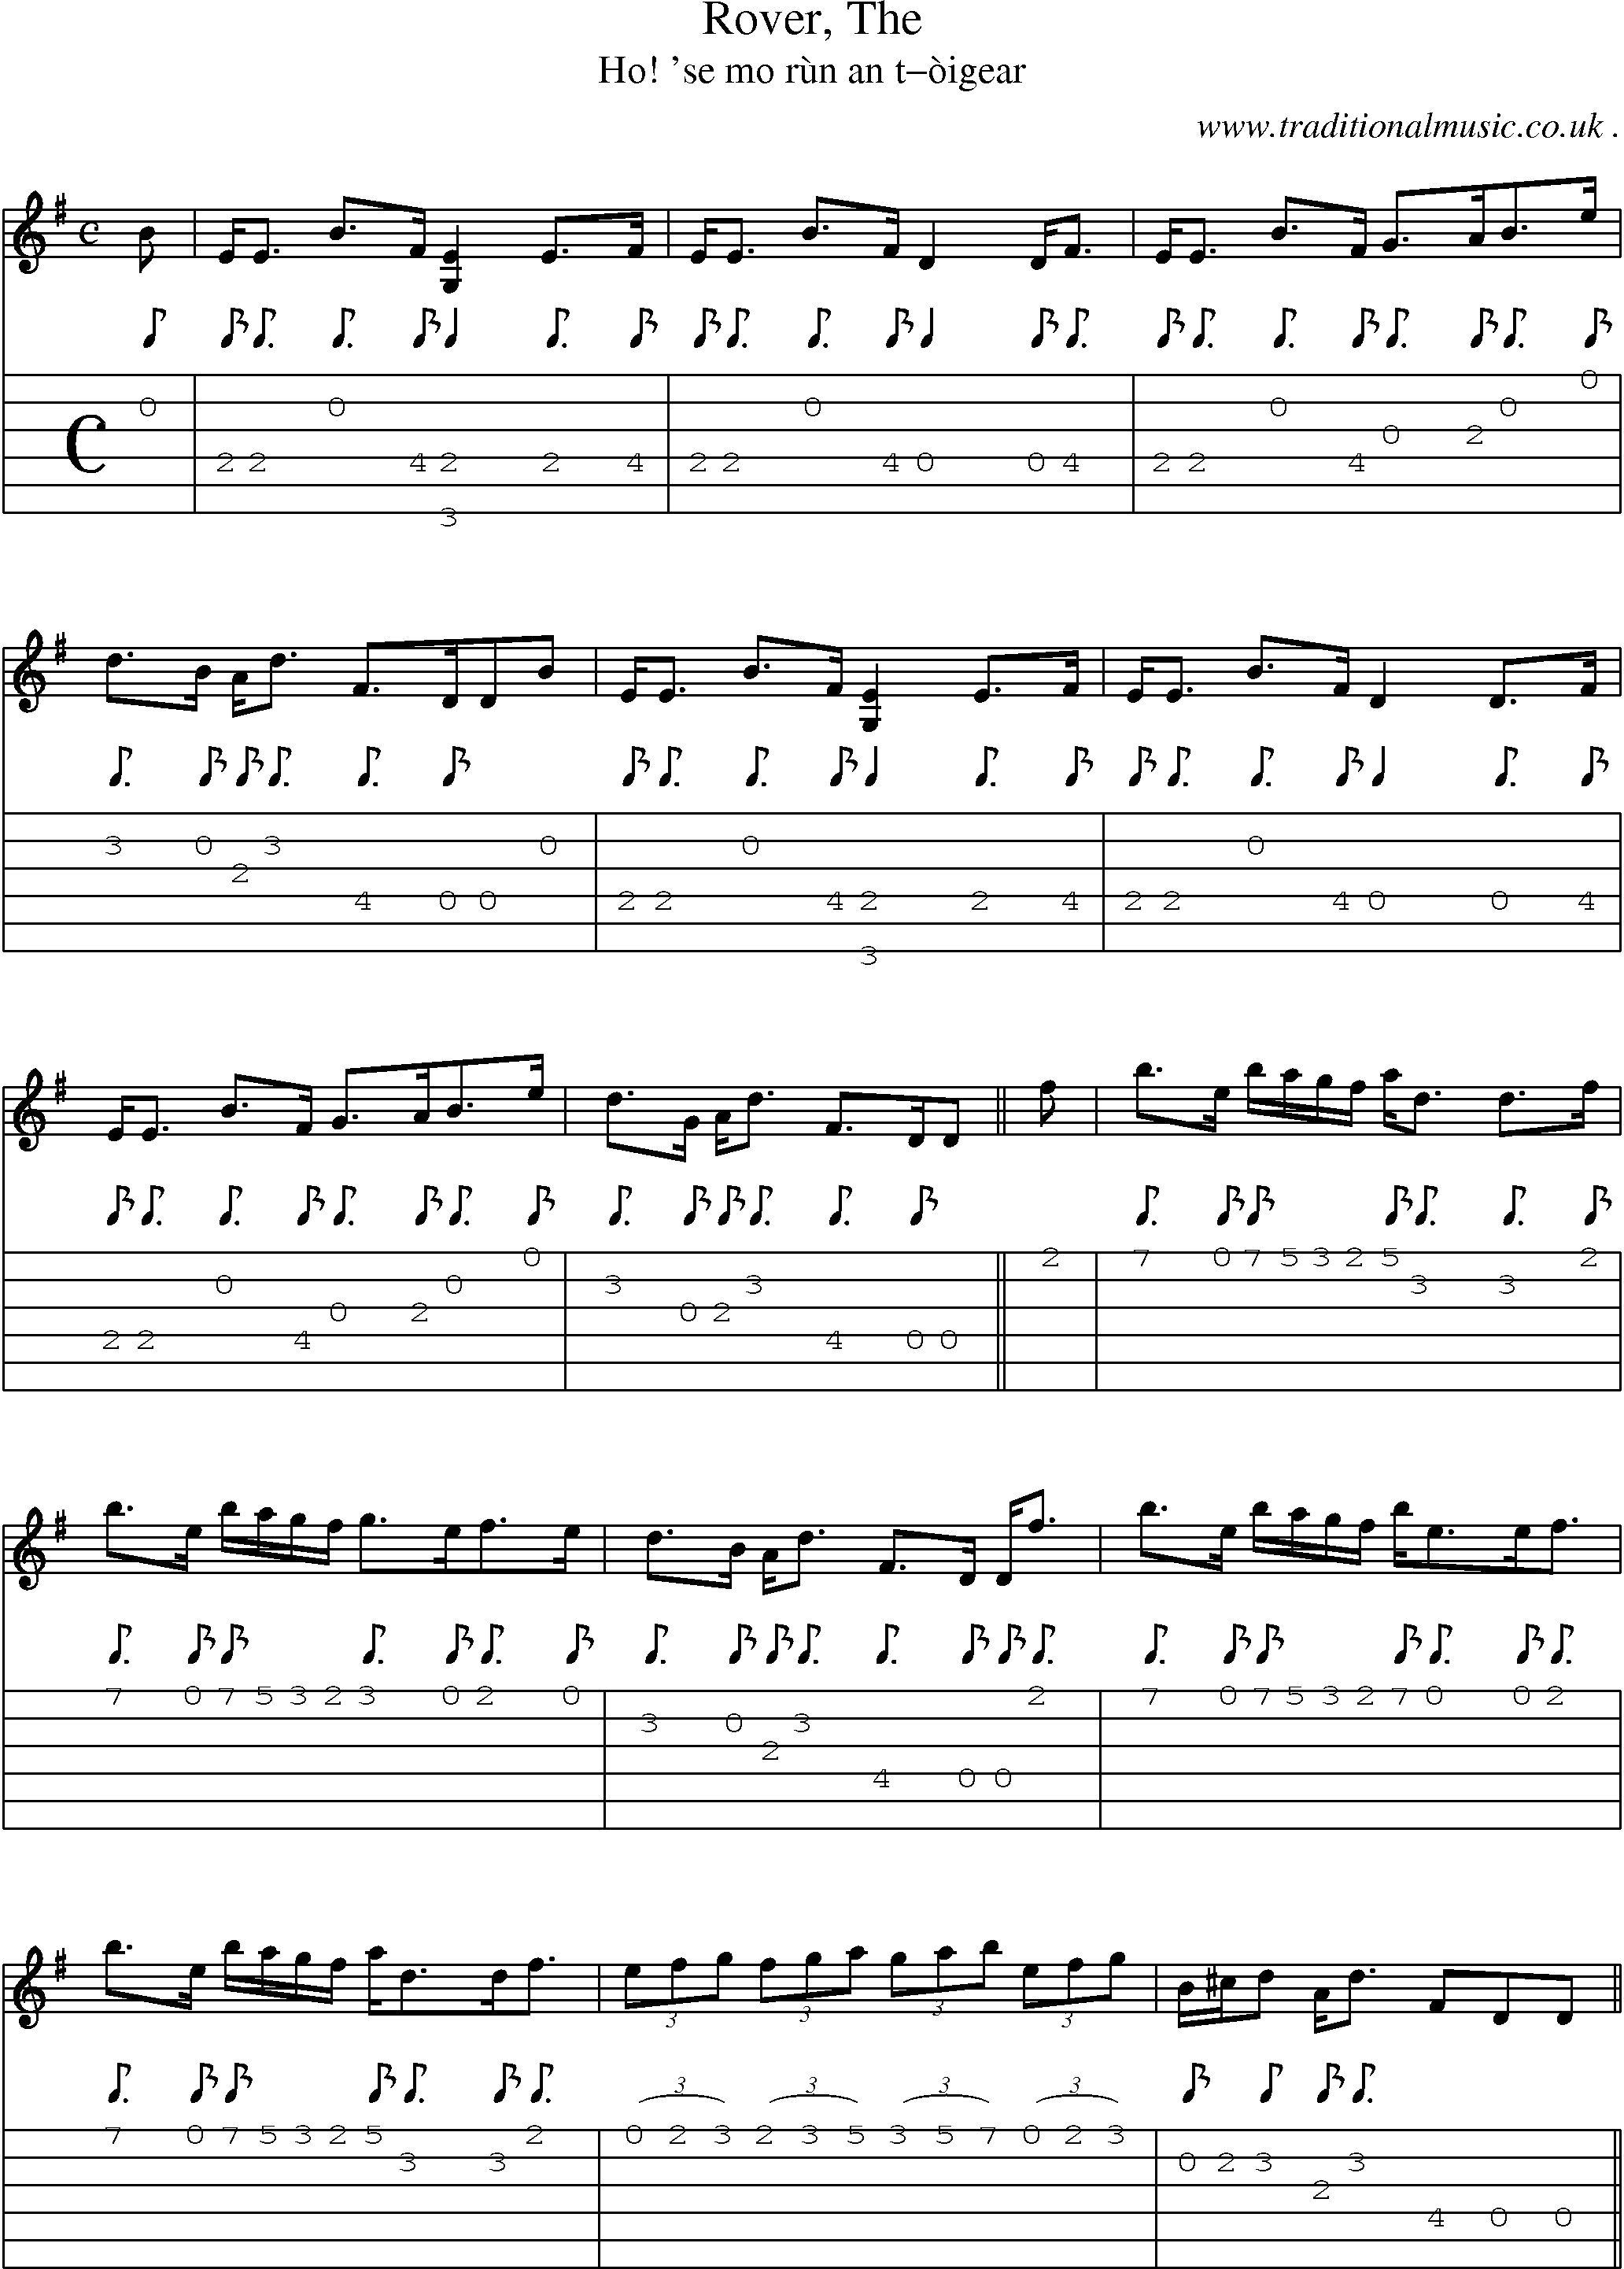 Sheet-music  score, Chords and Guitar Tabs for Rover The